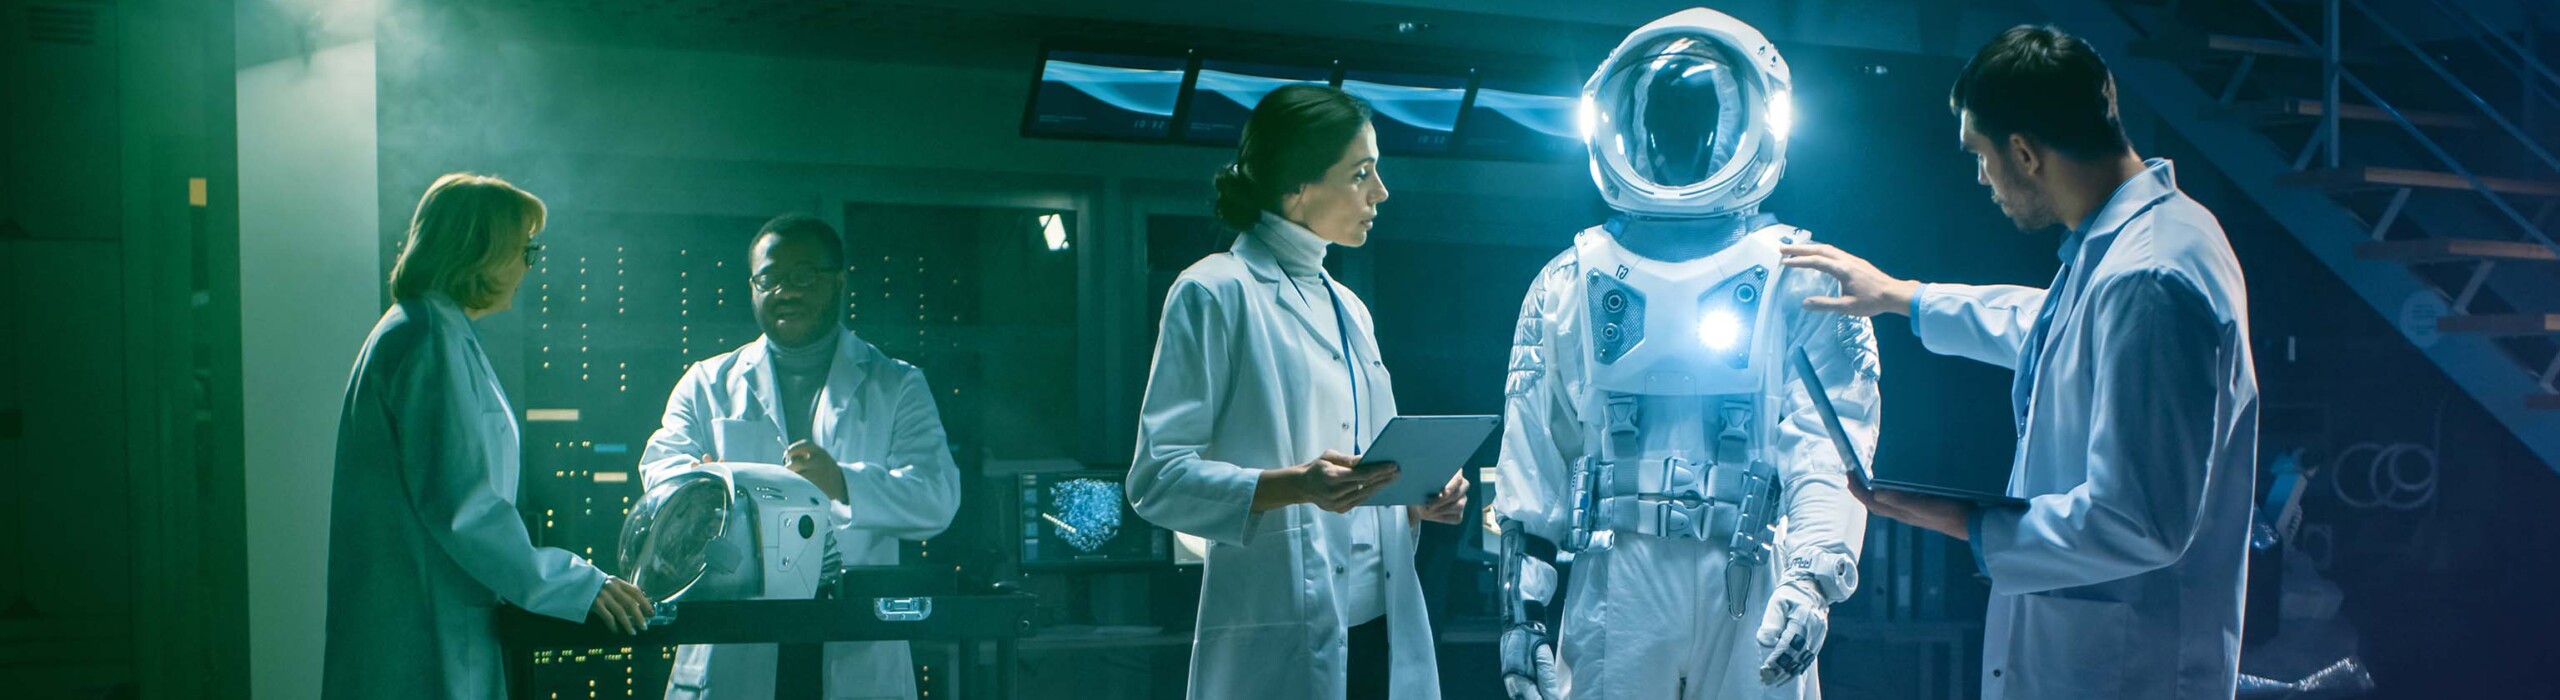 Team of Aerospace Engineers Design New Space Suit Adapted for Galaxy Exploration and Travel. Group of Scientists Wearing White Coats have Discussion, Use Computers. Constructing Astronaut Helmet